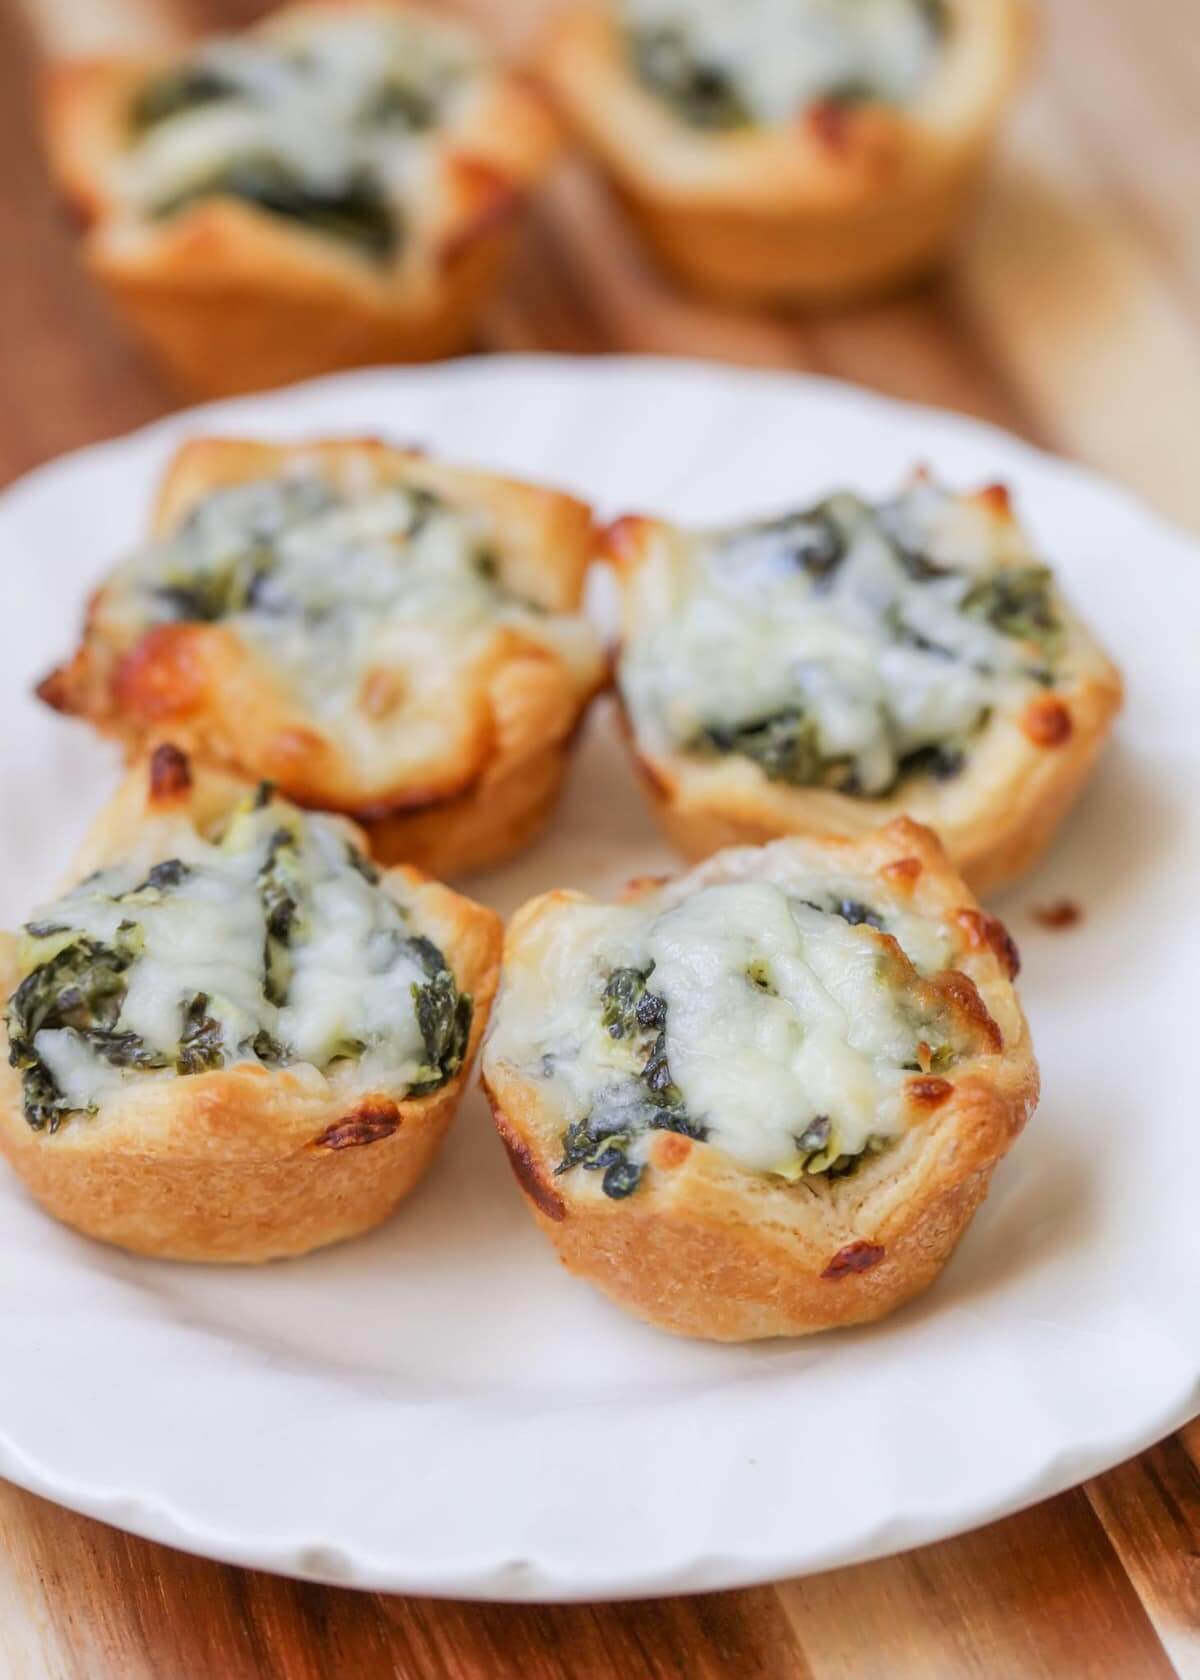 Spinach dip bites are a hit every time they’re served at a party or get-together!